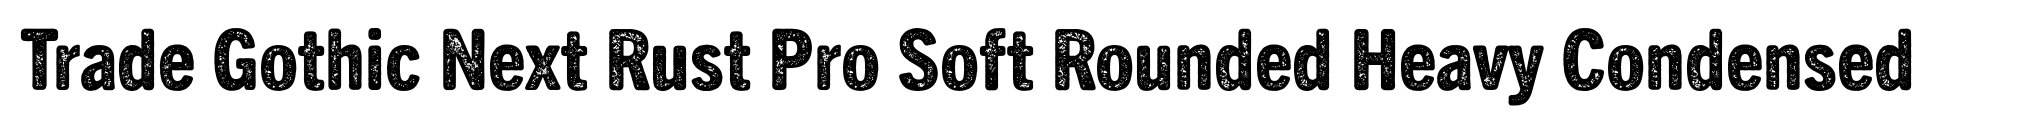 Trade Gothic Next Rust Pro Soft Rounded Heavy Condensed image